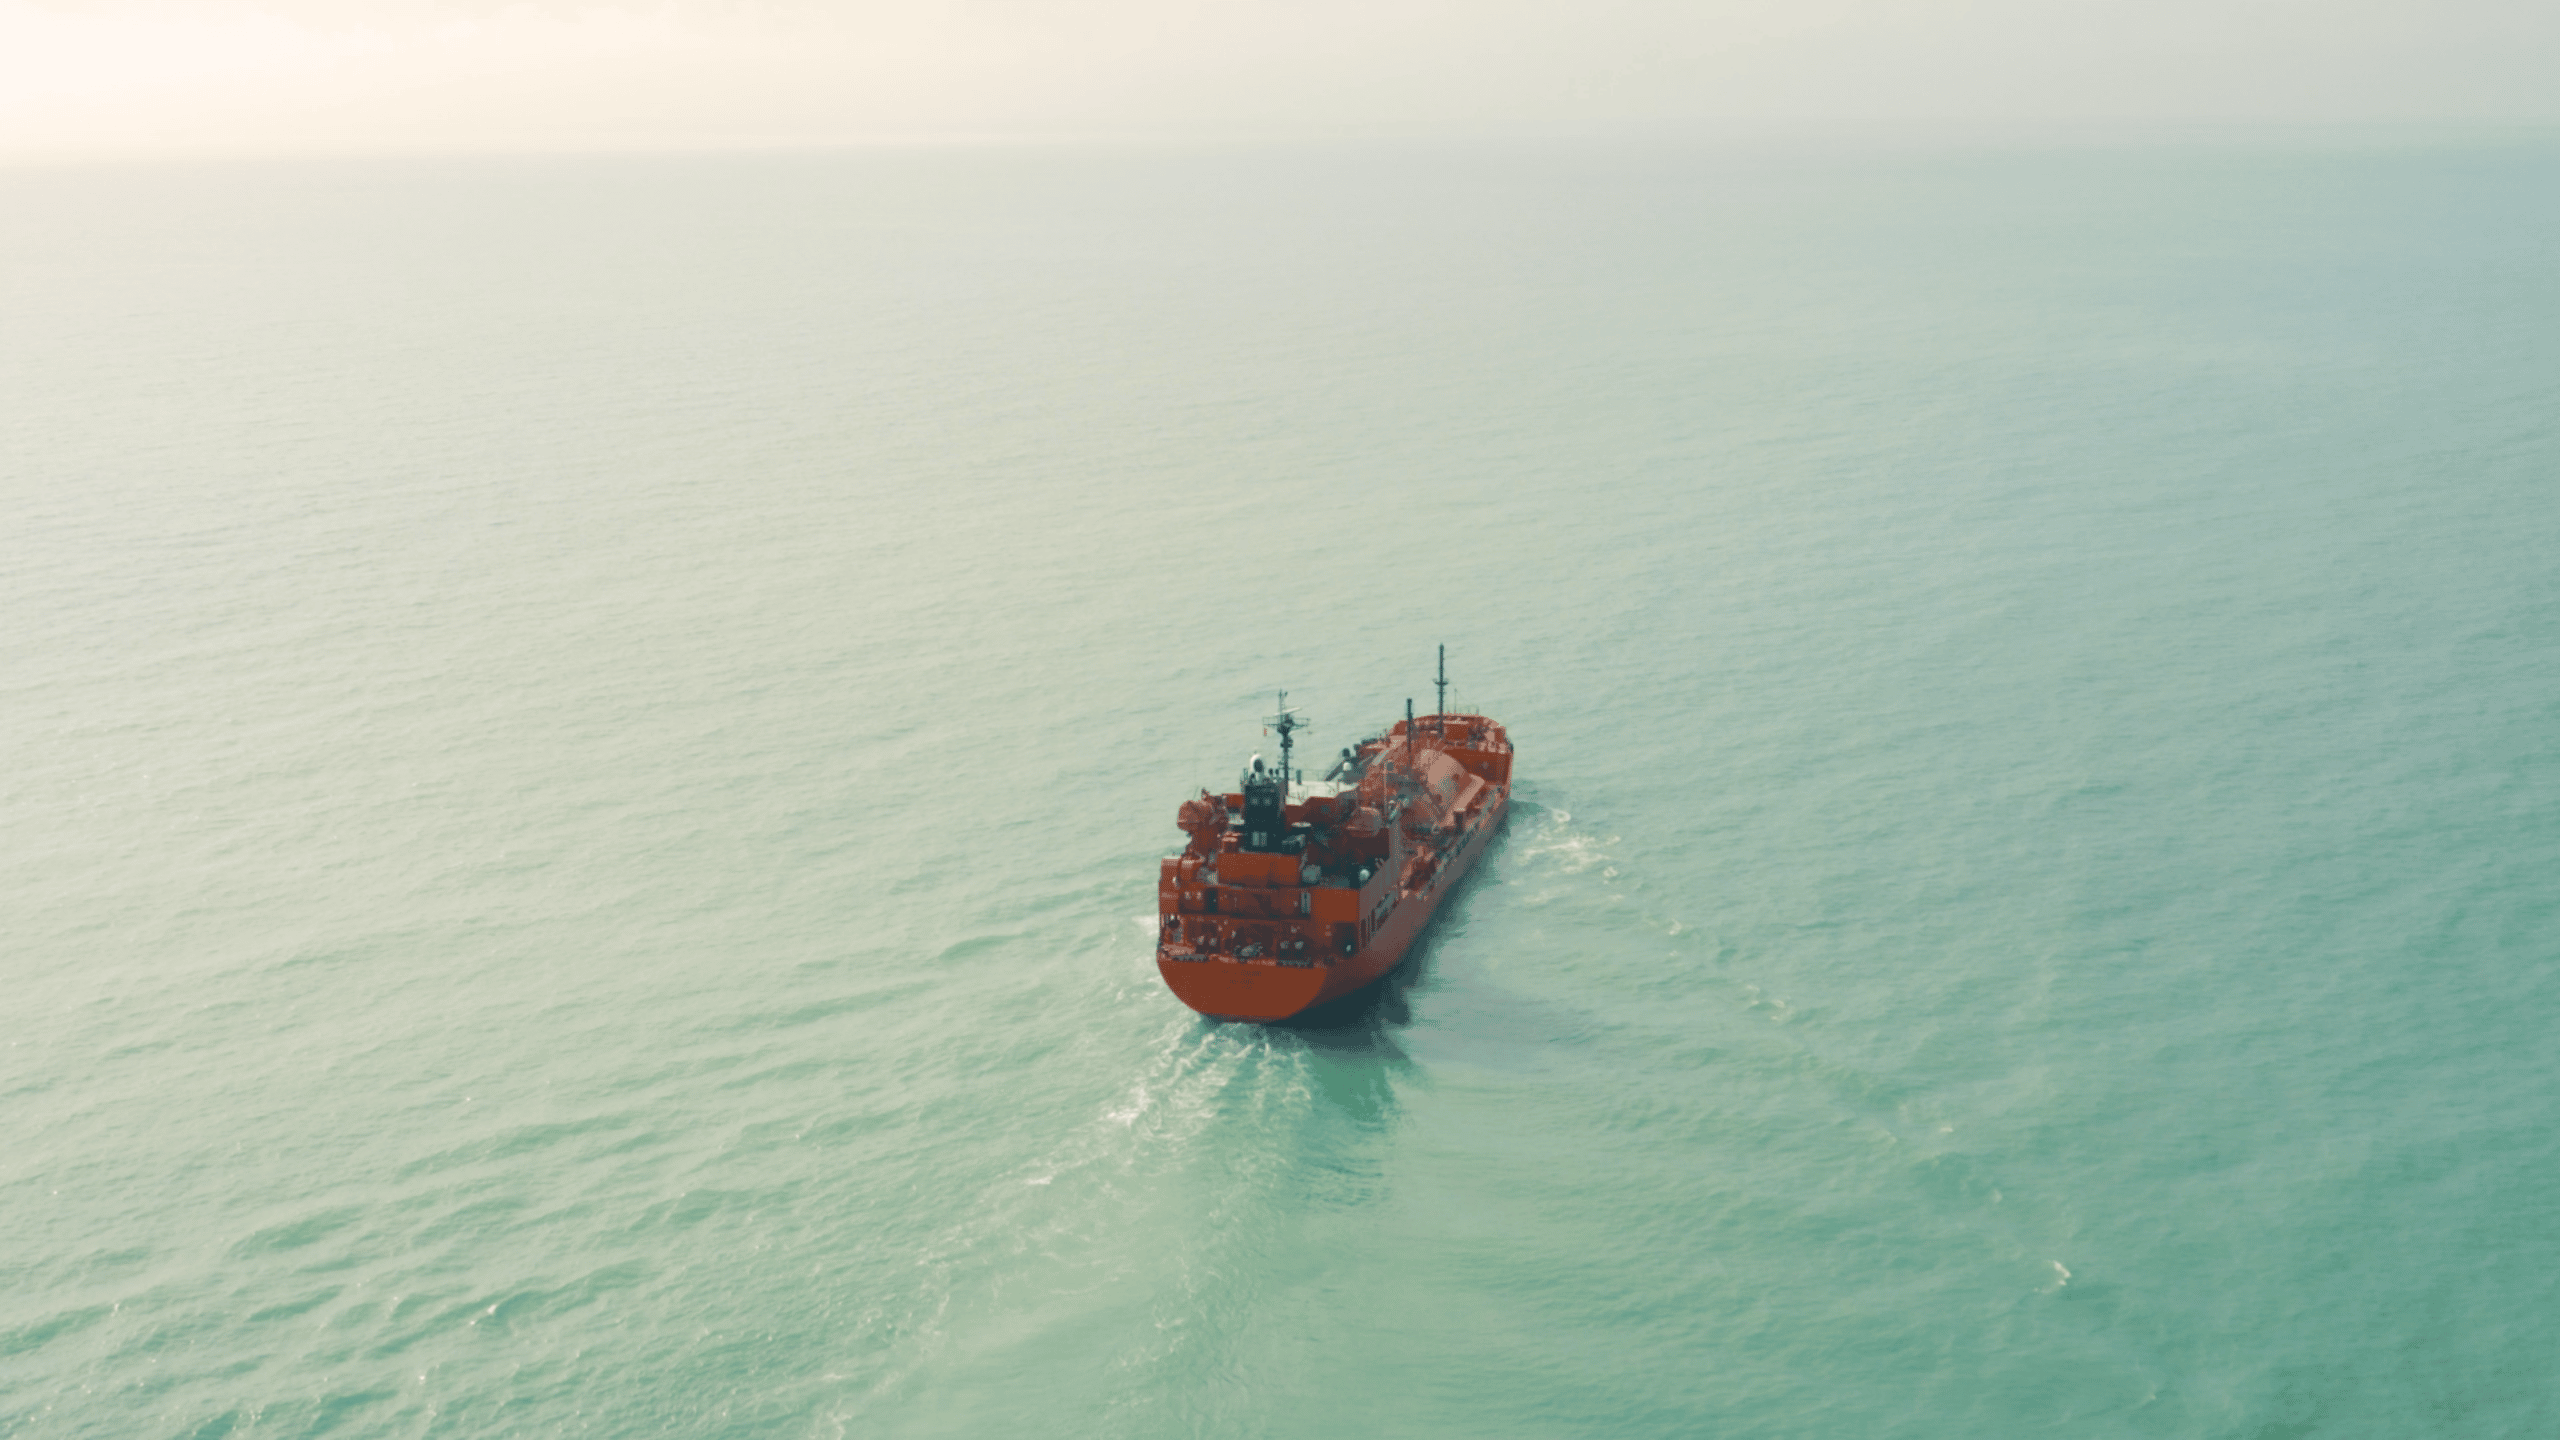 One of Grieg Shipbrokers' red gas ship in a open landscape on the ocean.